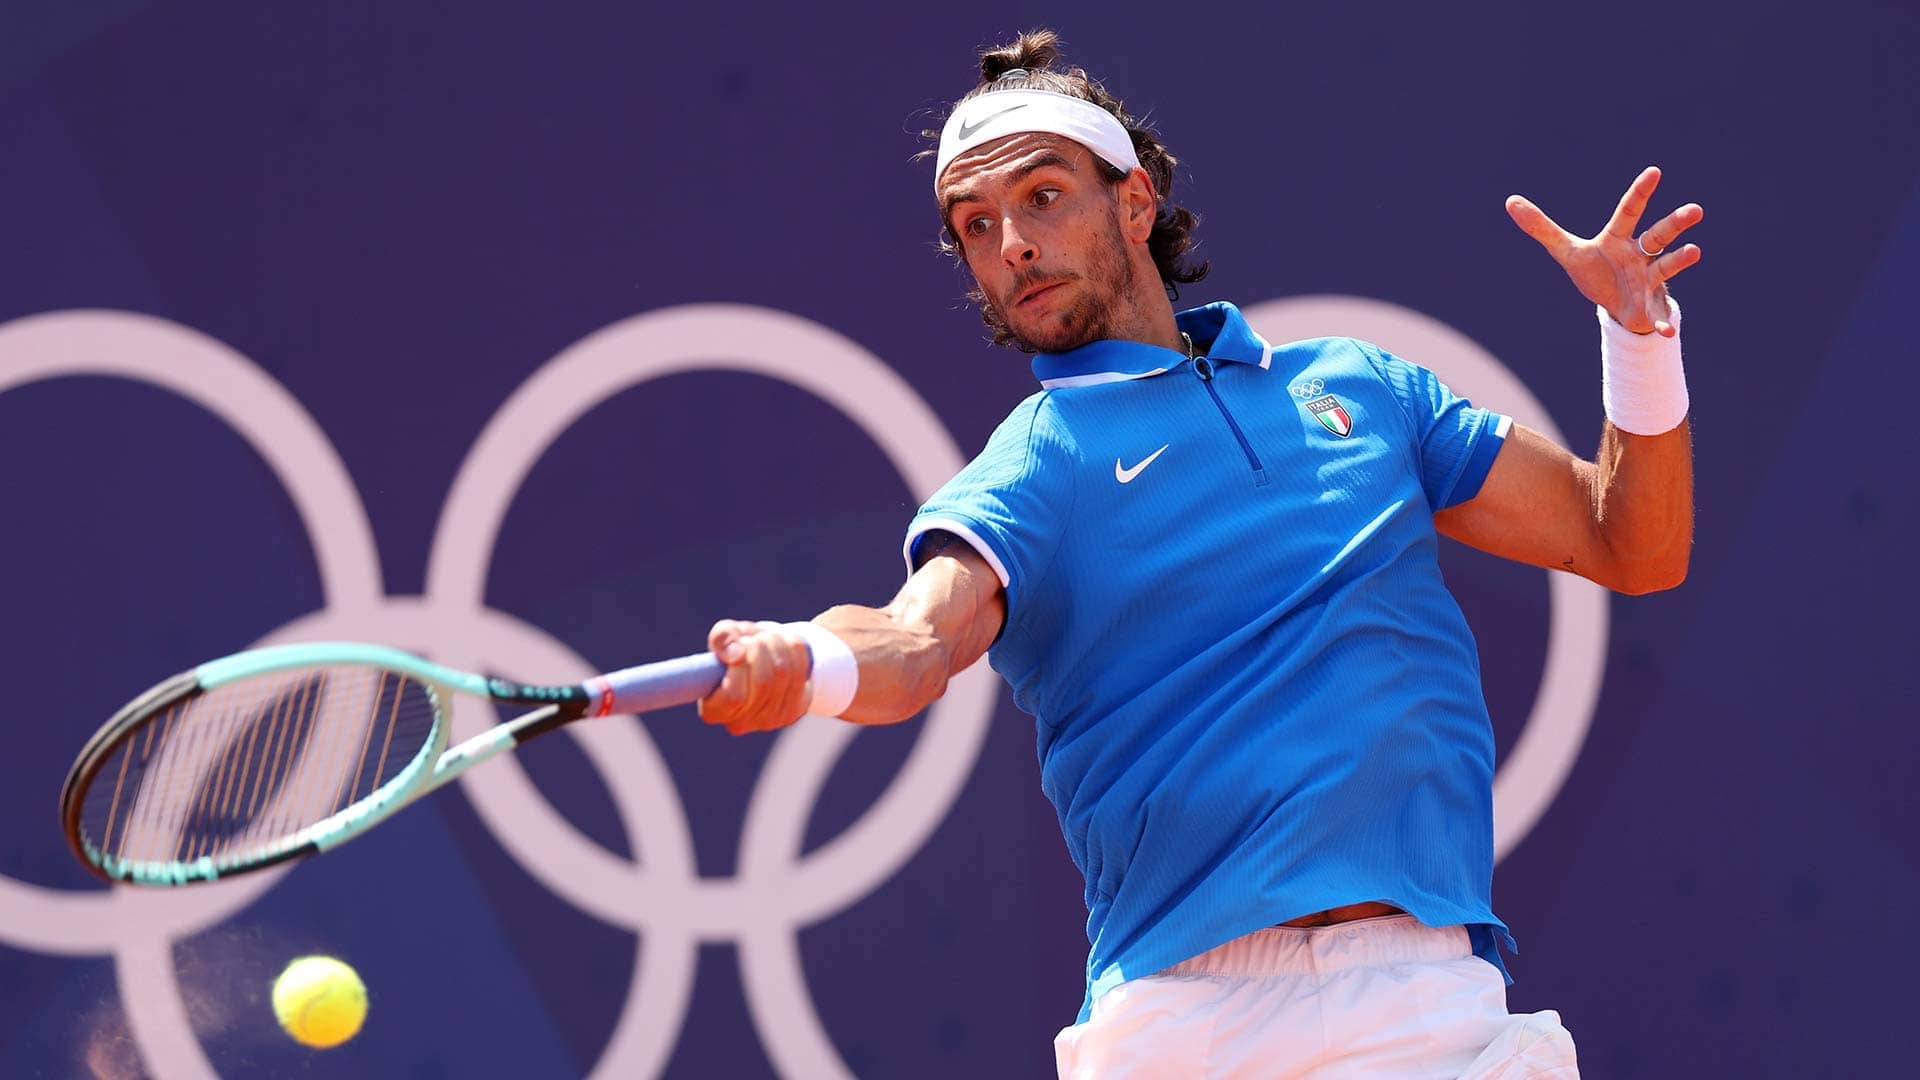 From Umag to Paris, Musetti upsets Zverev to reach Olympics SFs